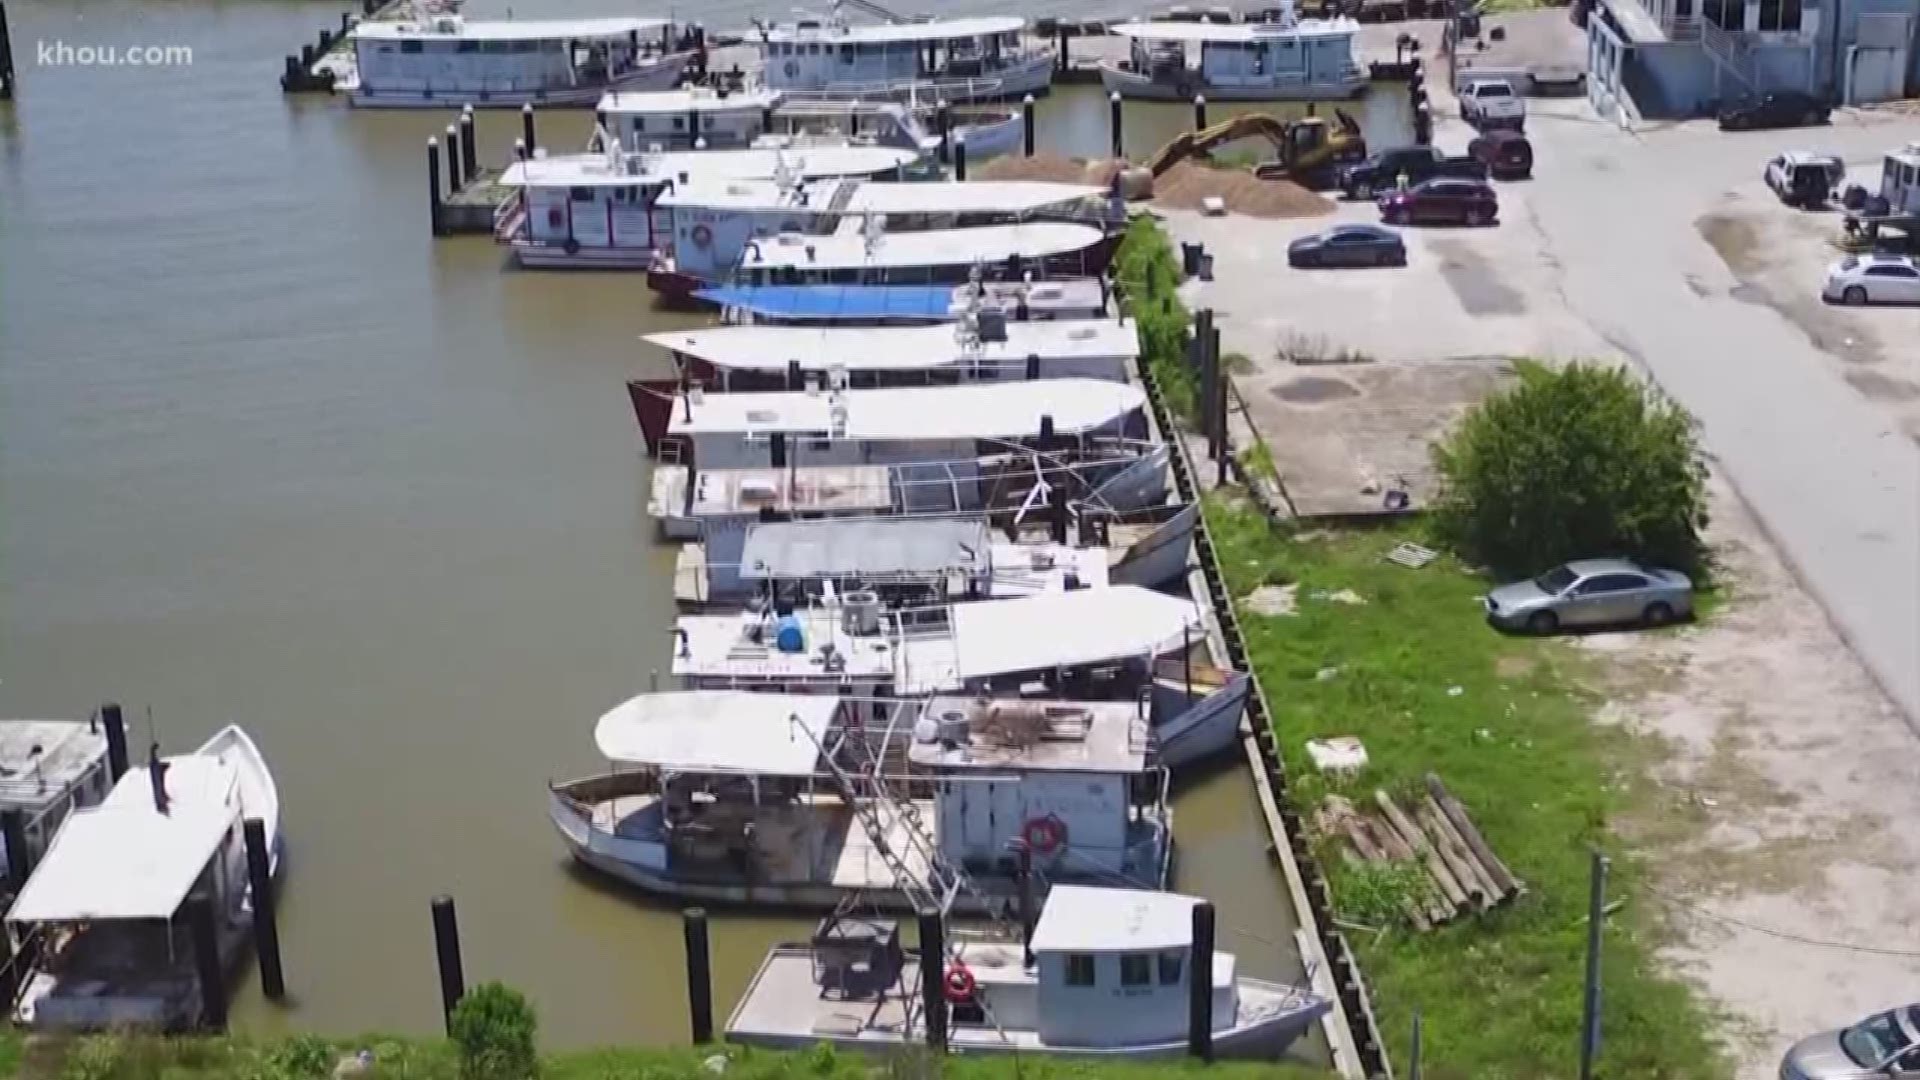 Officials have banned fishing in Galveston Bay after a barge and tanker collided sending chemicals into the water.